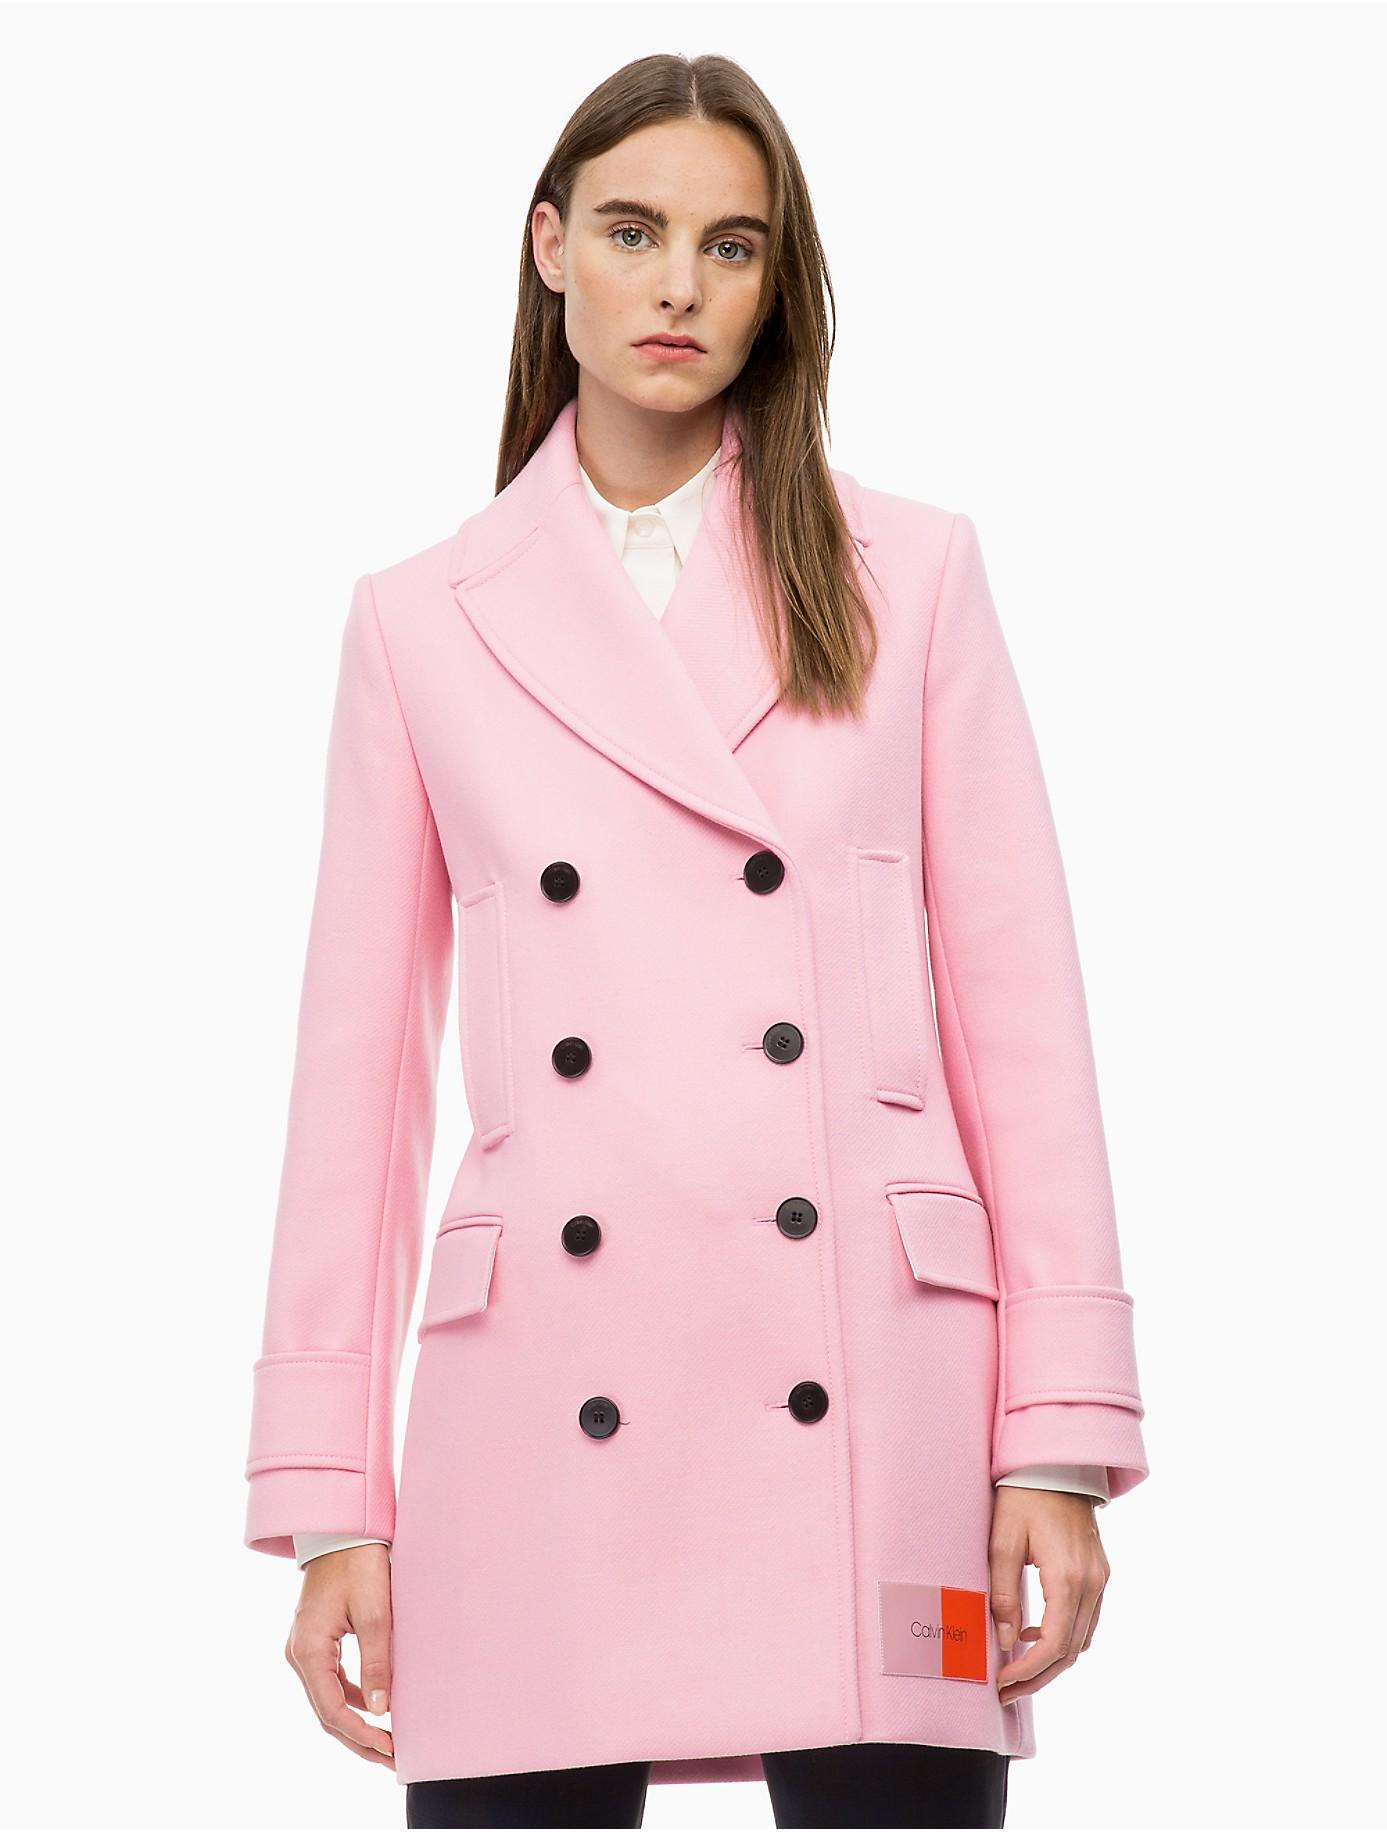 Calvin Klein Structured Wool Pea Coat in Pink | Lyst